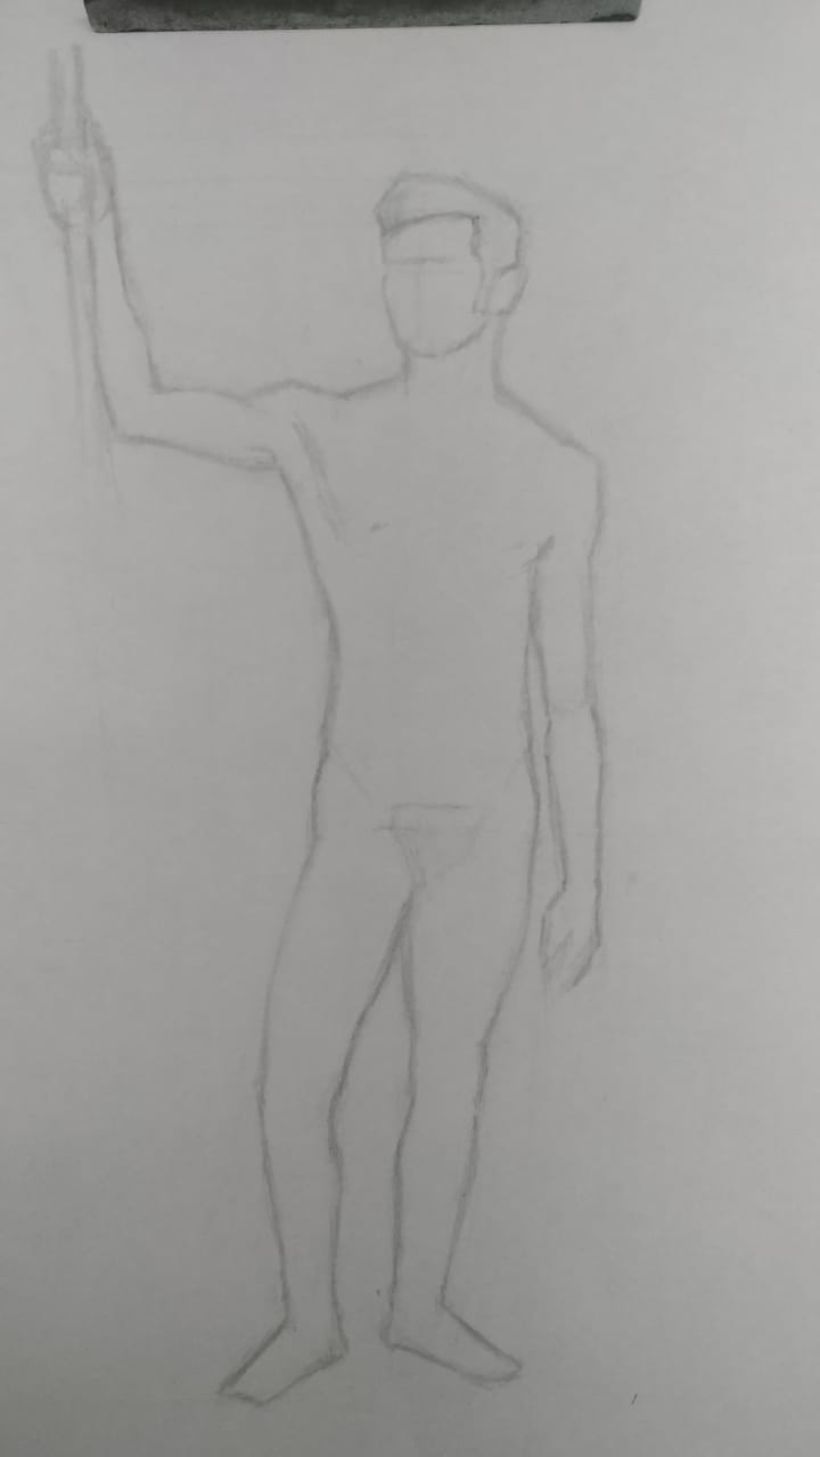 My project in Realistic Human Figure Drawing course